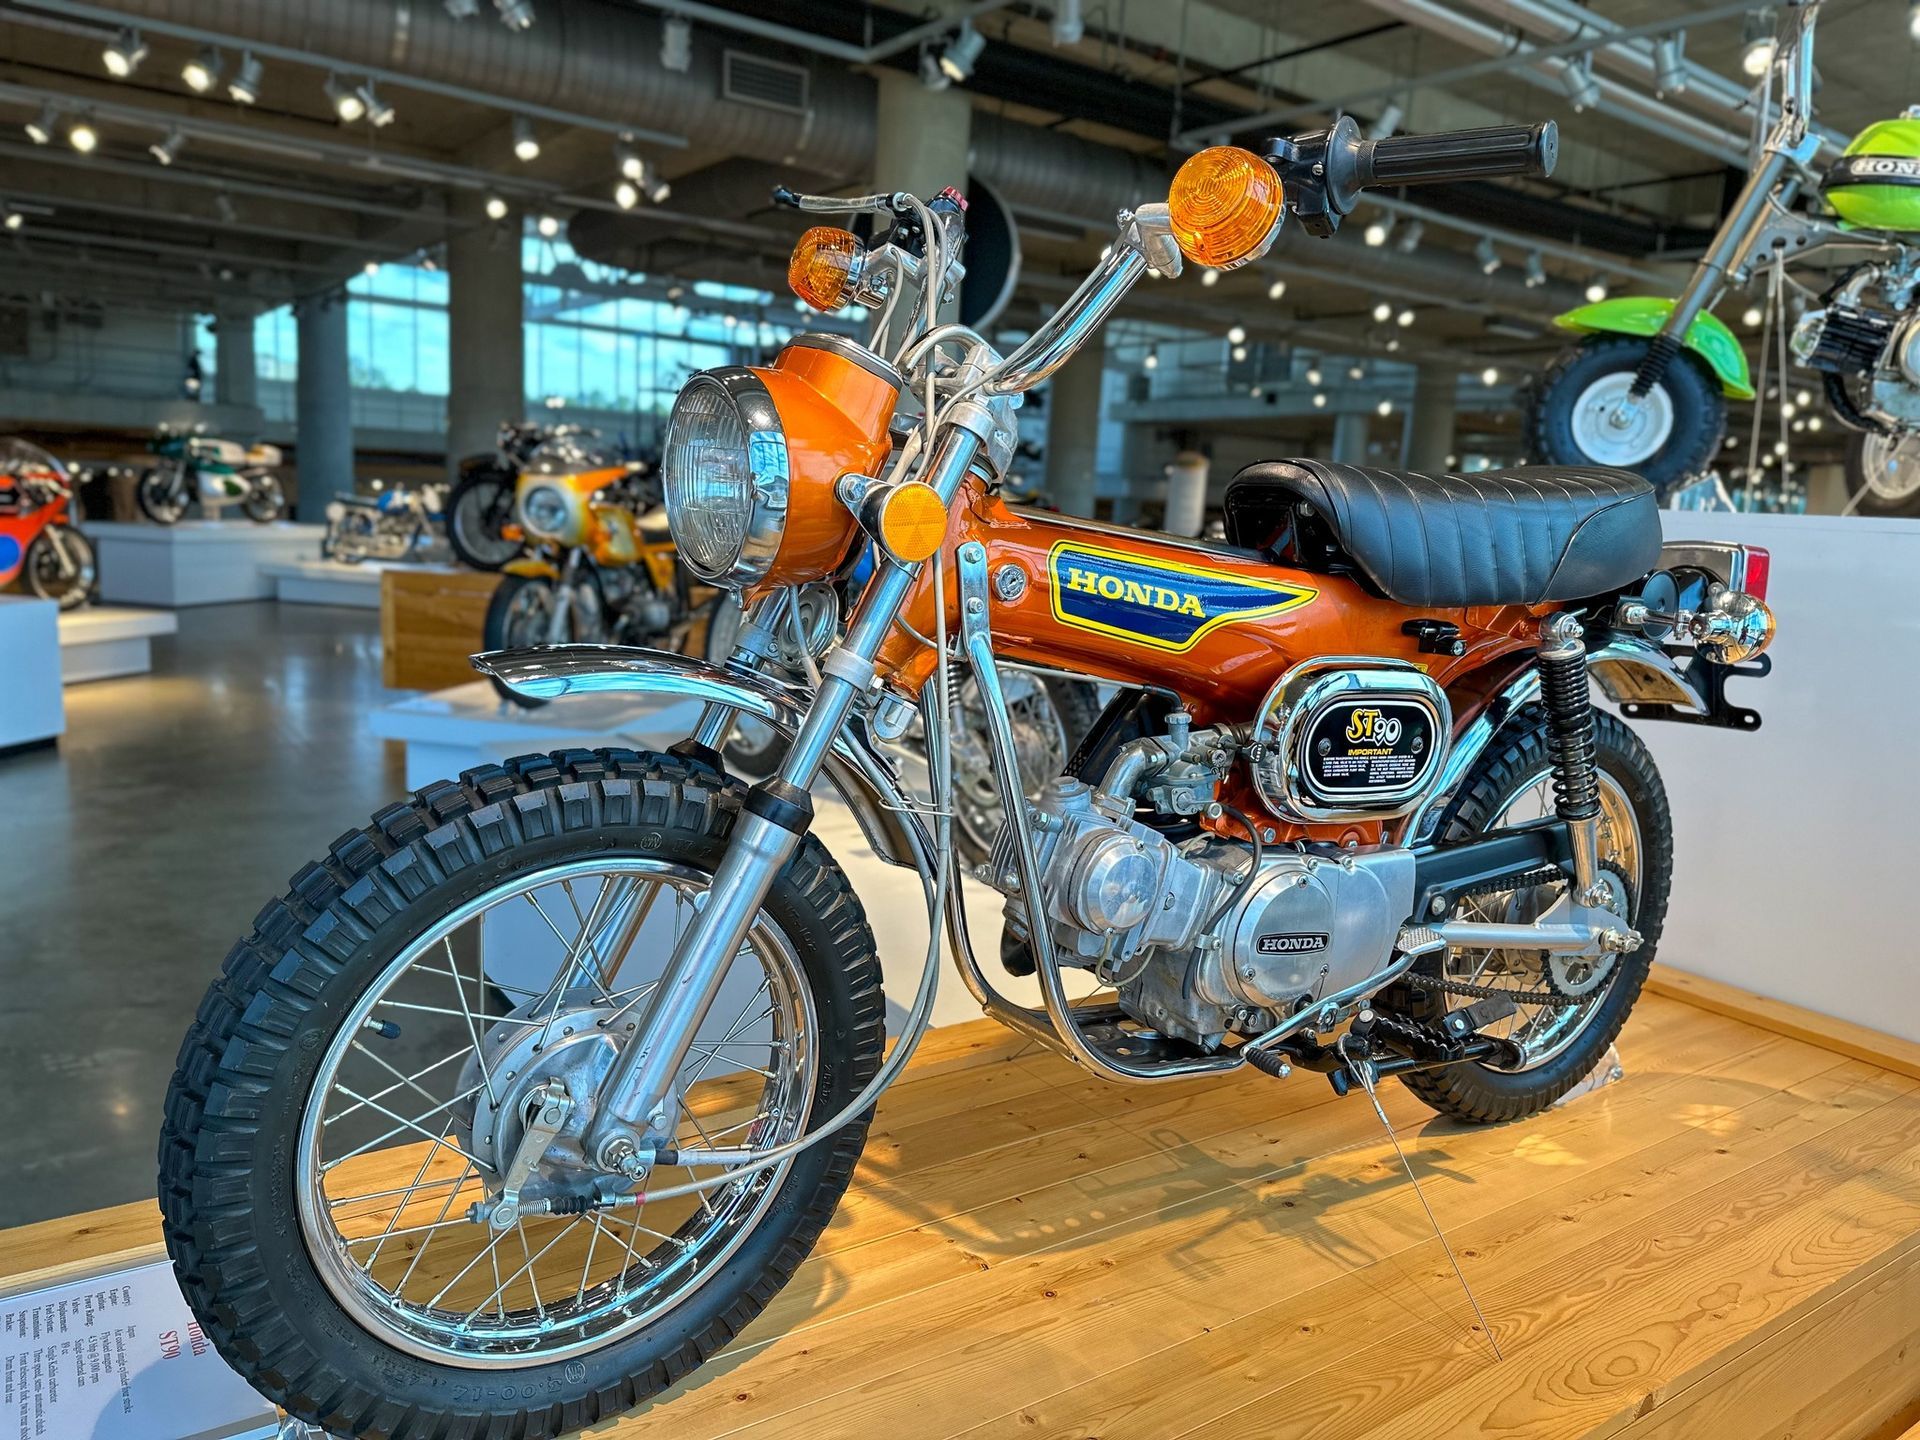 World's Largest Motorcycle Museum: world record in Birmingham, Alabama